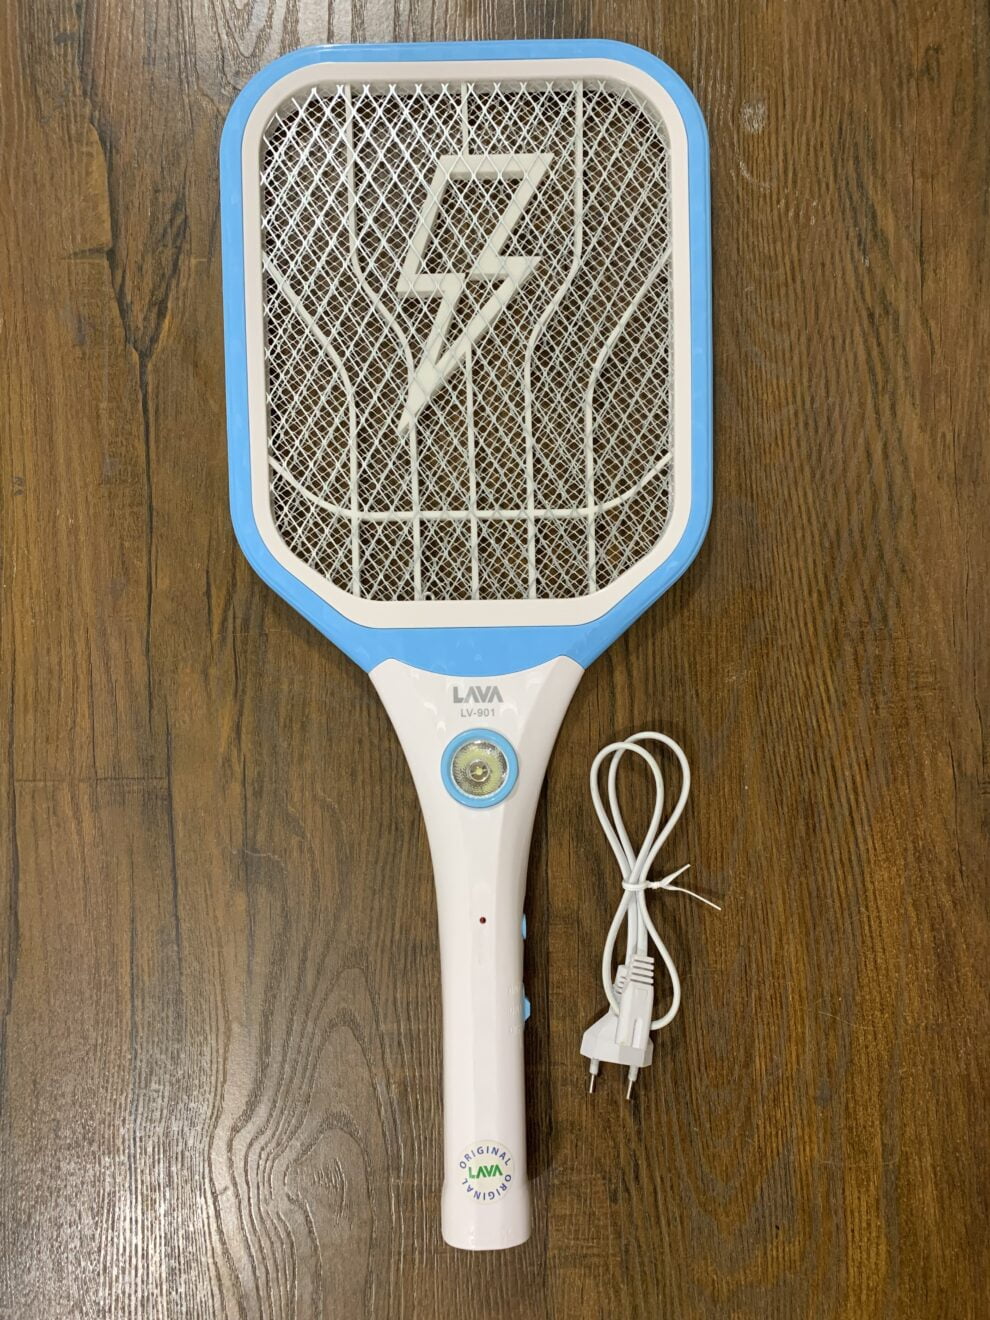 LAVA rechargeable mosquito killer swatter racket LV-901 SOGO featured